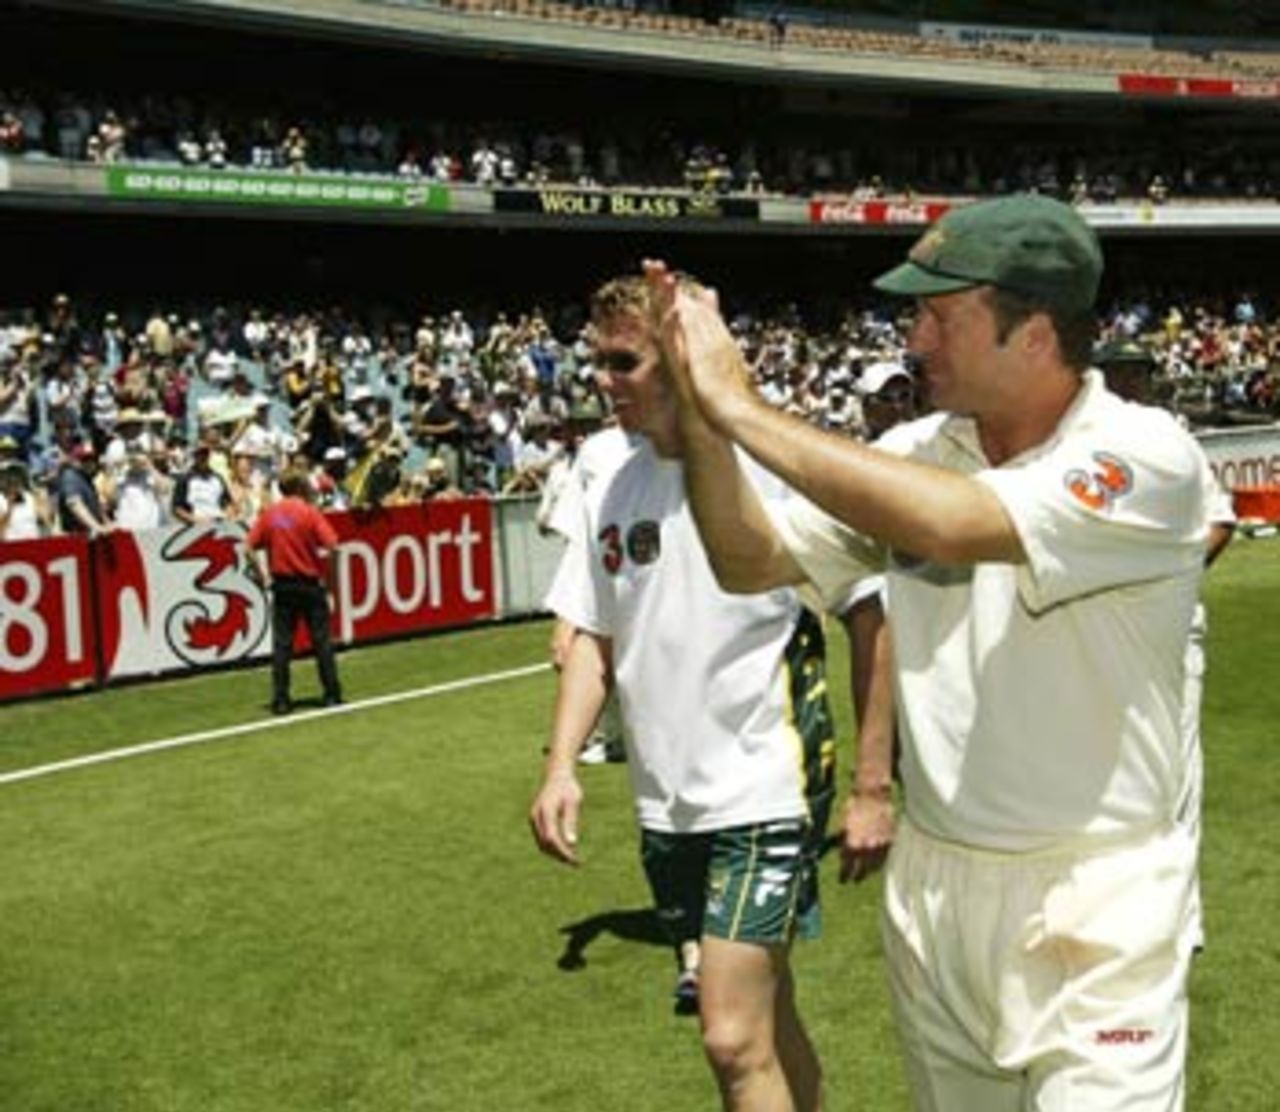 Some Australians jogged a victory lap to thank the crowd for their support, Australia v India, 3rd Test, Melbourne, 5th day, December 30, 2003